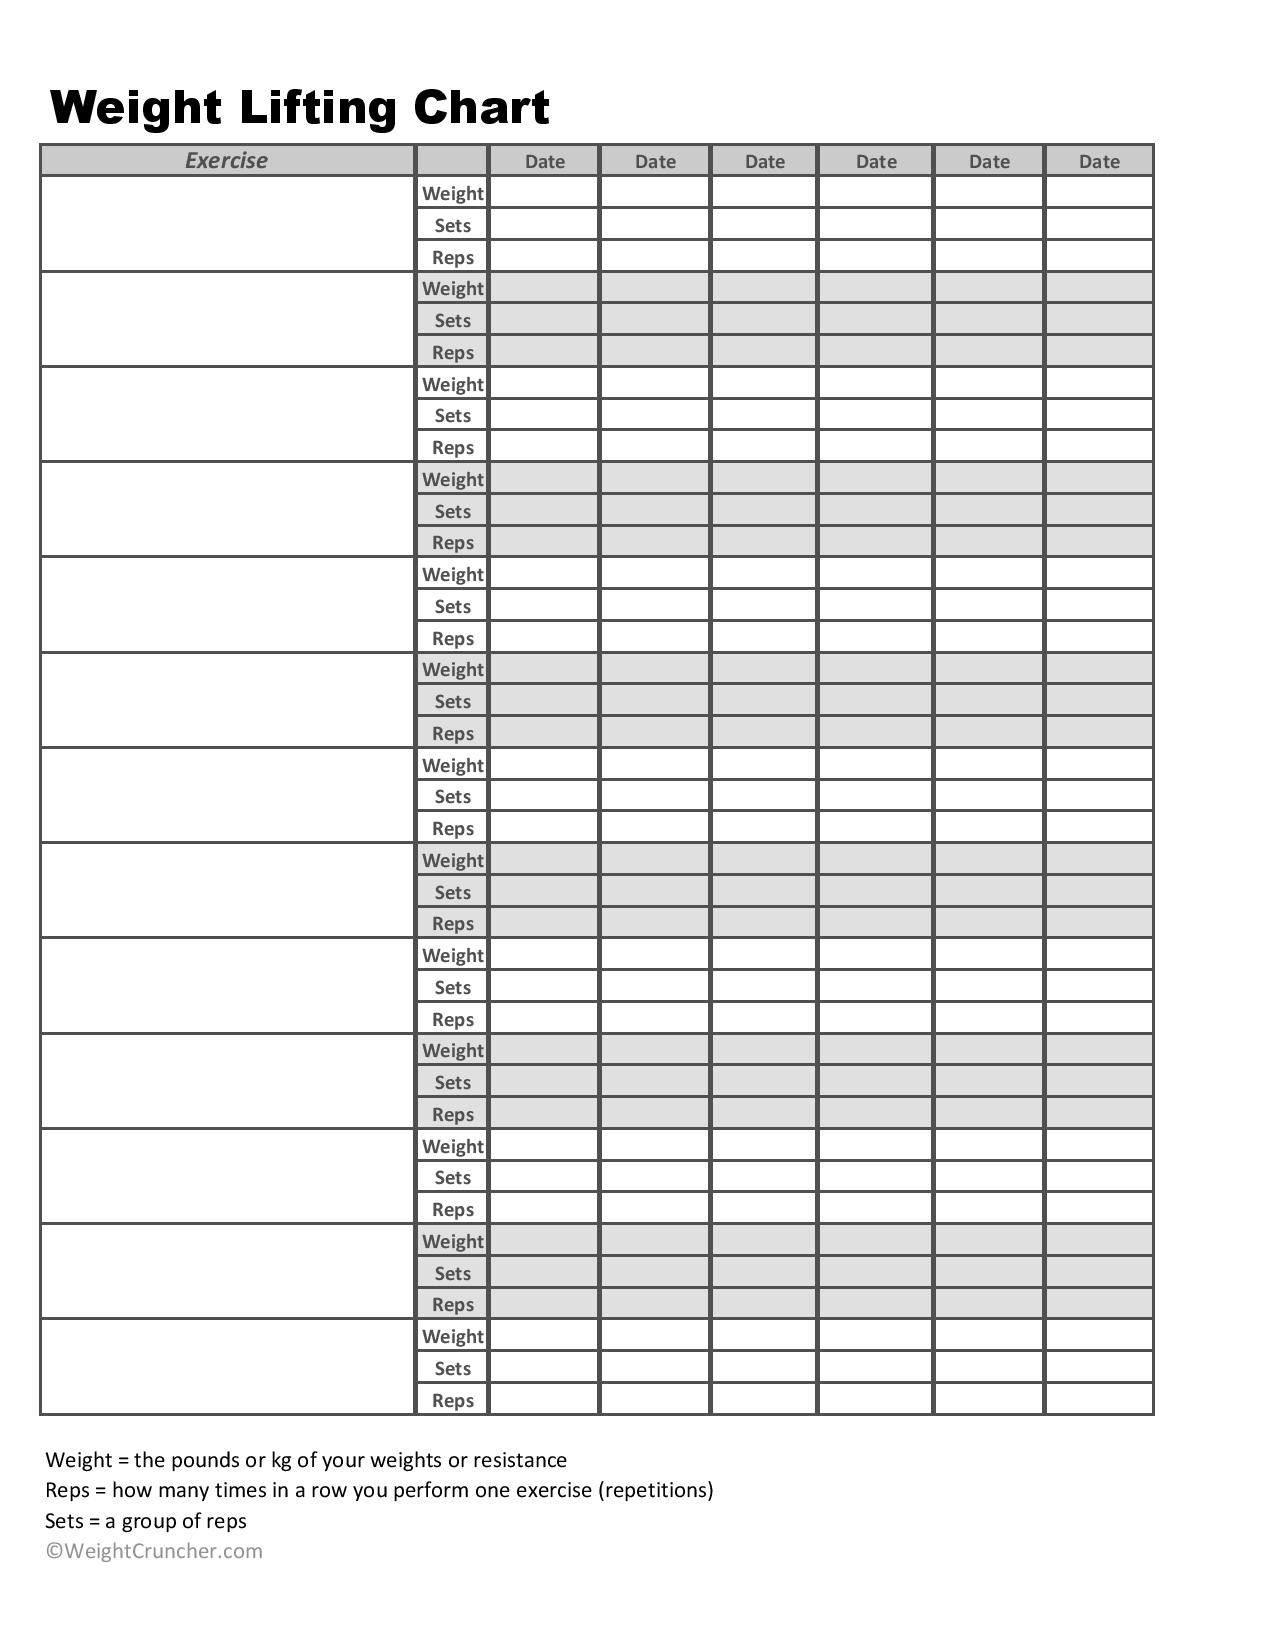 Printable Weight Lifting Chart | Shop Fresh pertaining to Printable Fill In Lifting Scedual